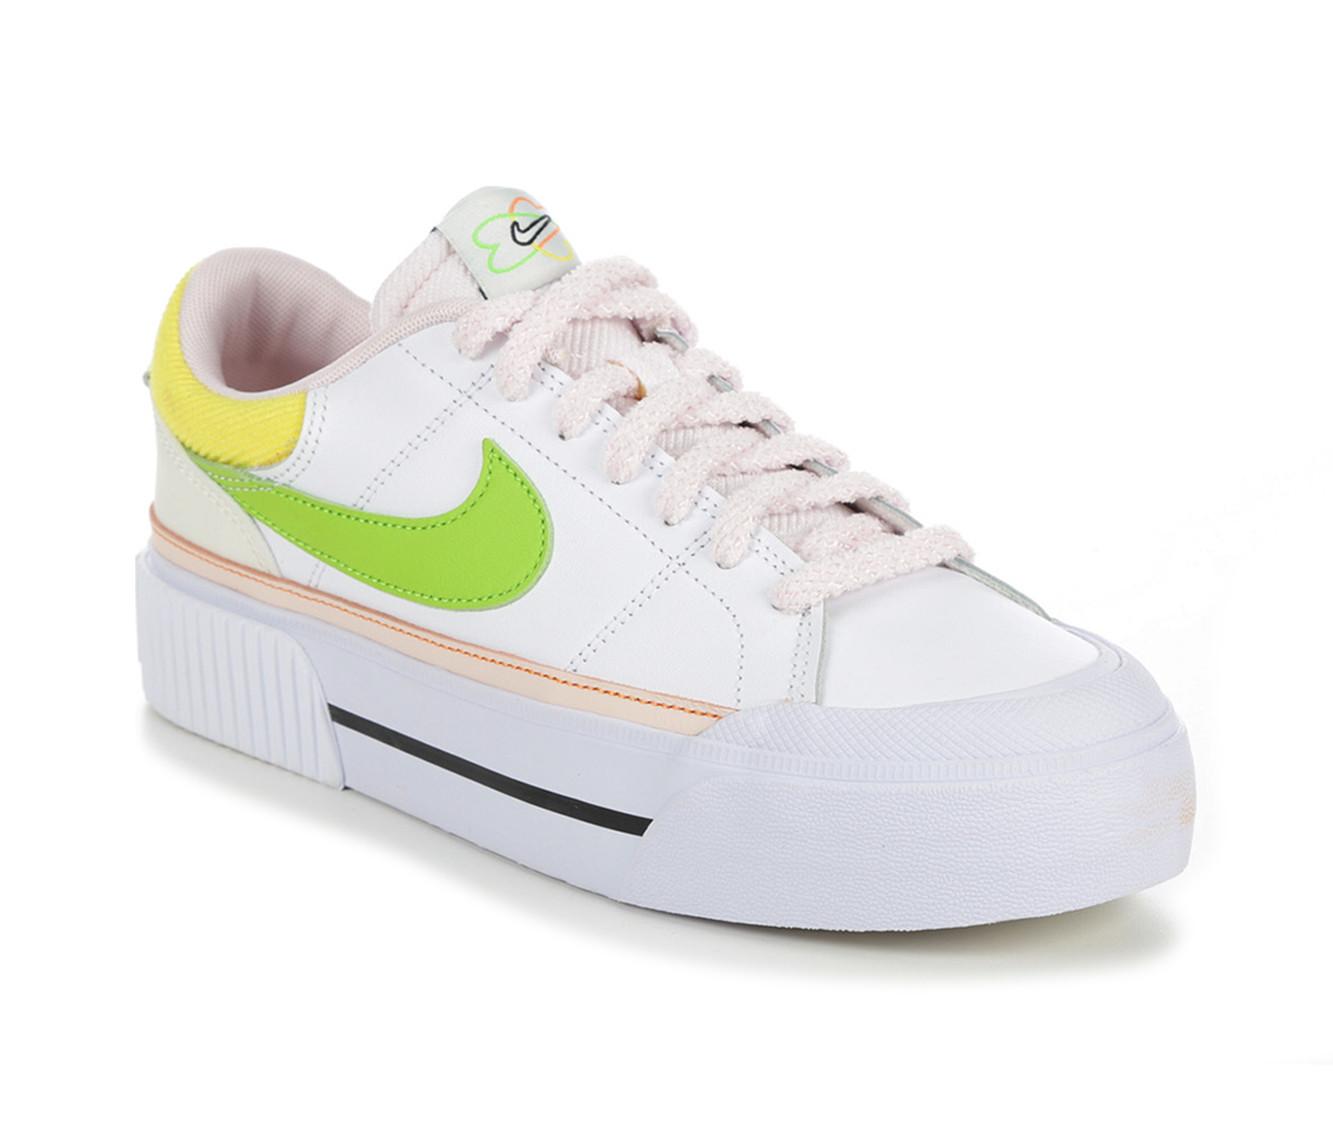 Cabecear Perspectiva chisme Women's Nike Court Legacy Lift AP Platform Sneakers